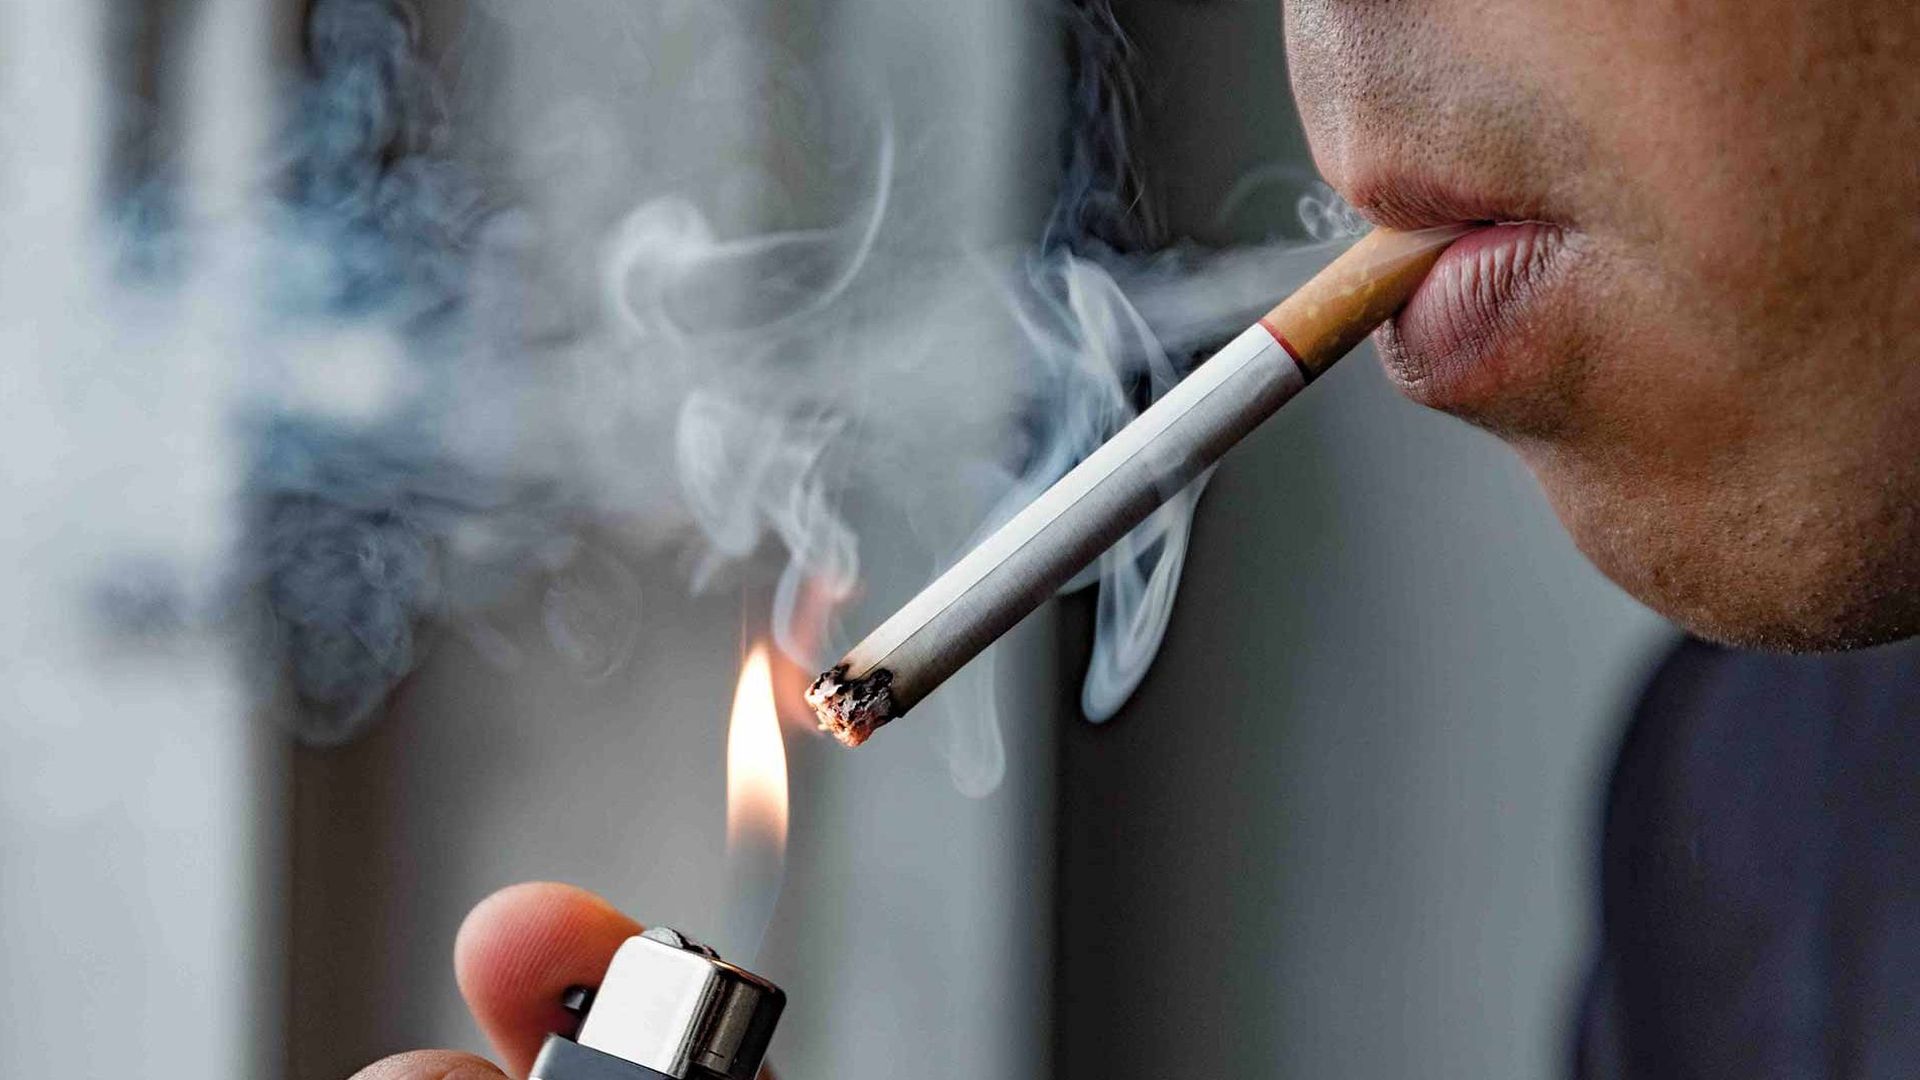 You Can Still Get Lung Cancer Even If You Never Smoked